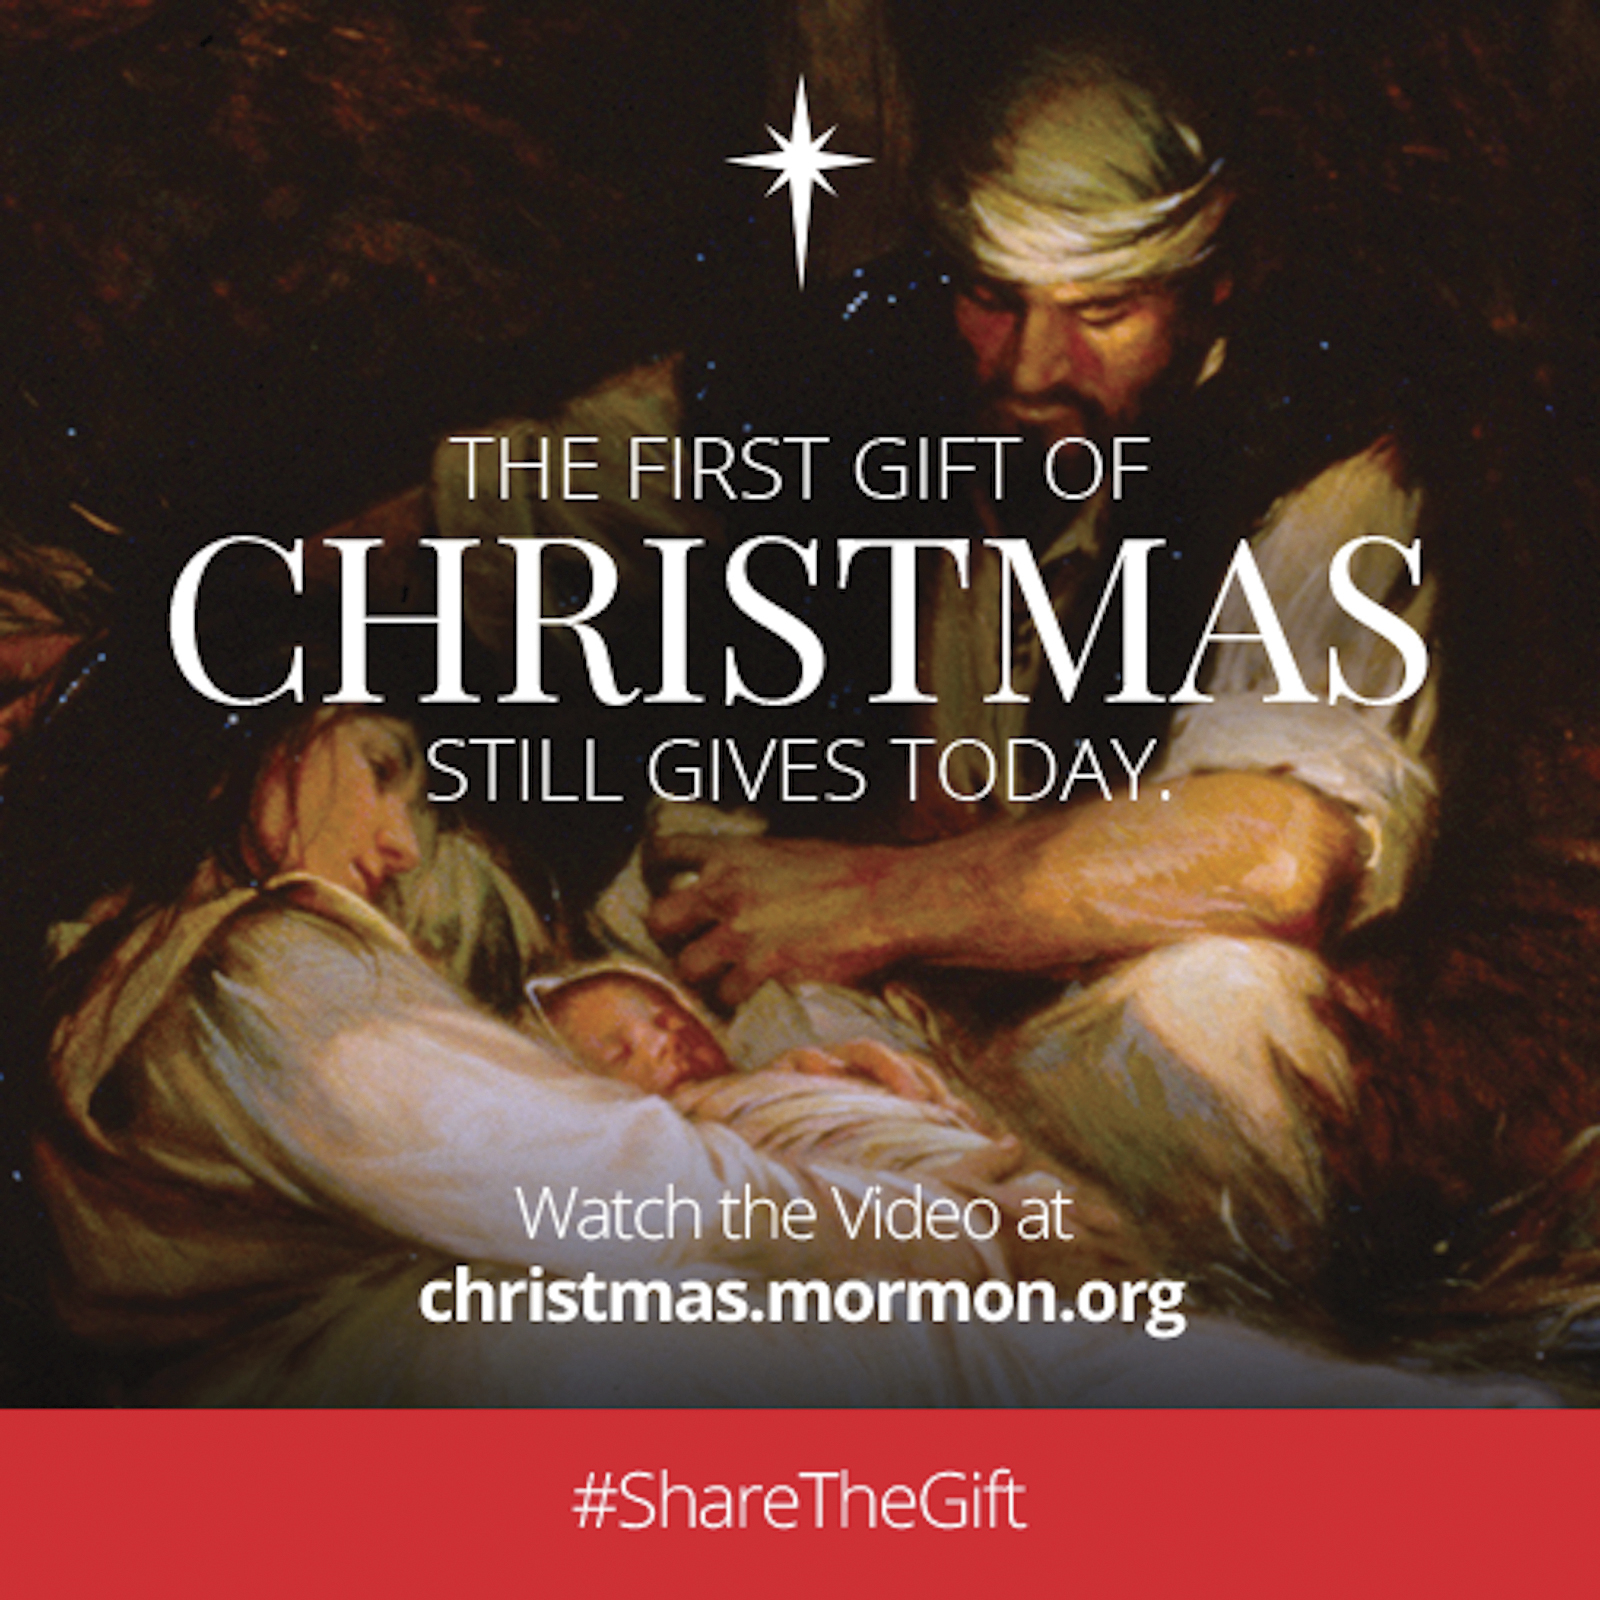 The first gift of Christmas still gives today. Watch the video at christmas.mormon.org. #ShareTheGift